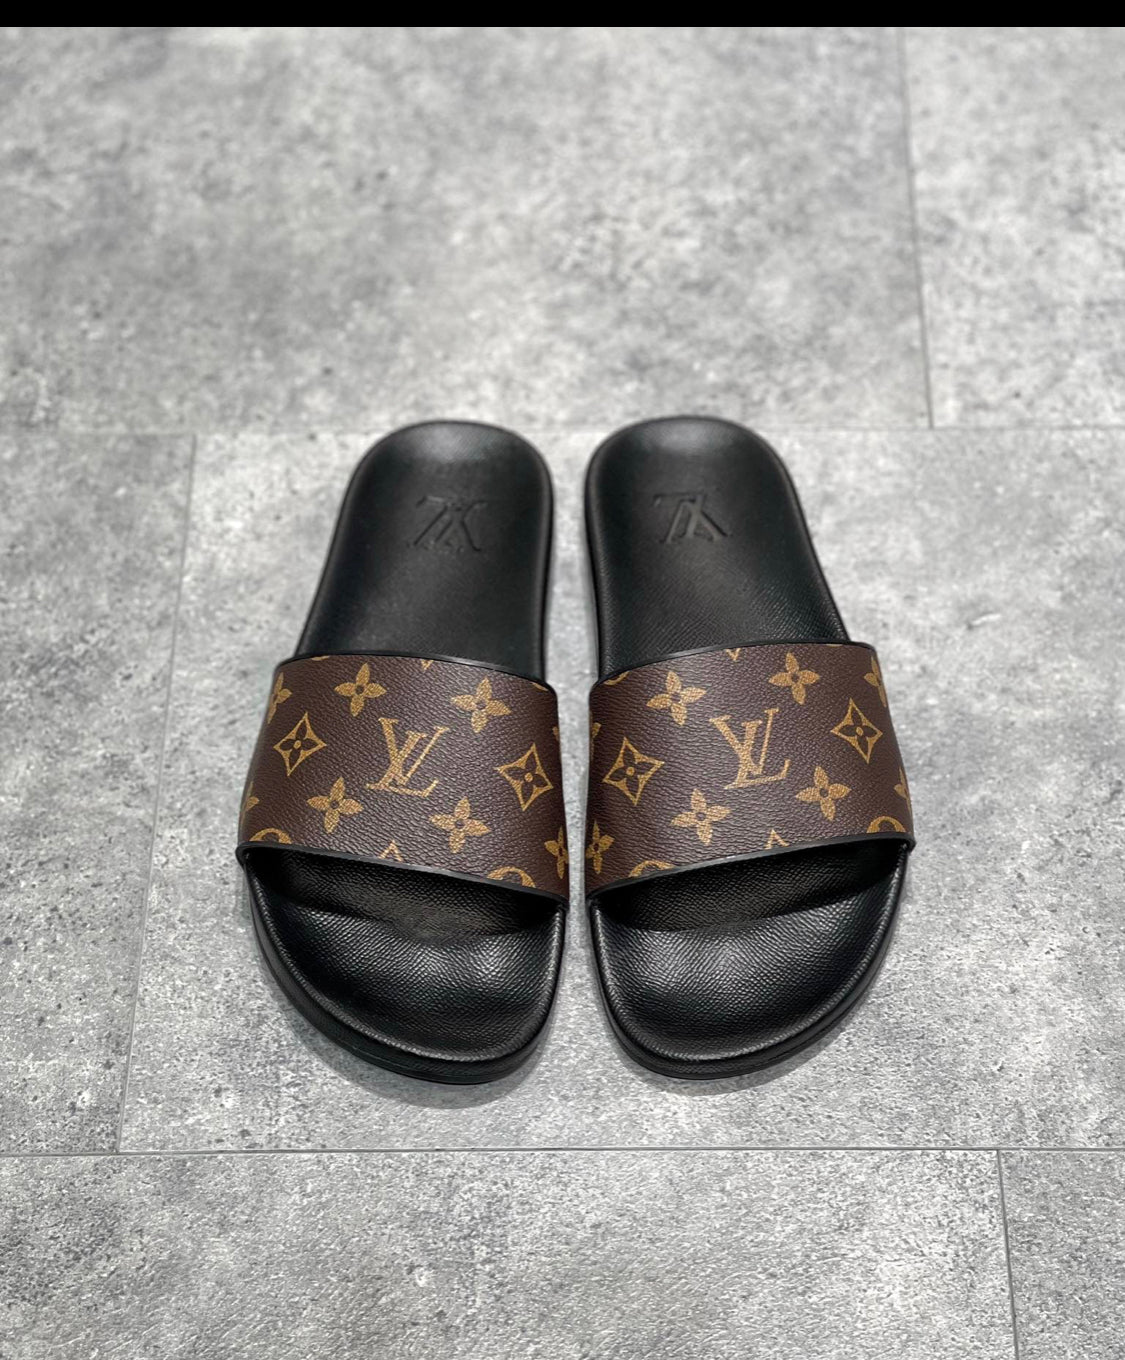 Claquette Lv mules water front facture#N# – Ringo shopping